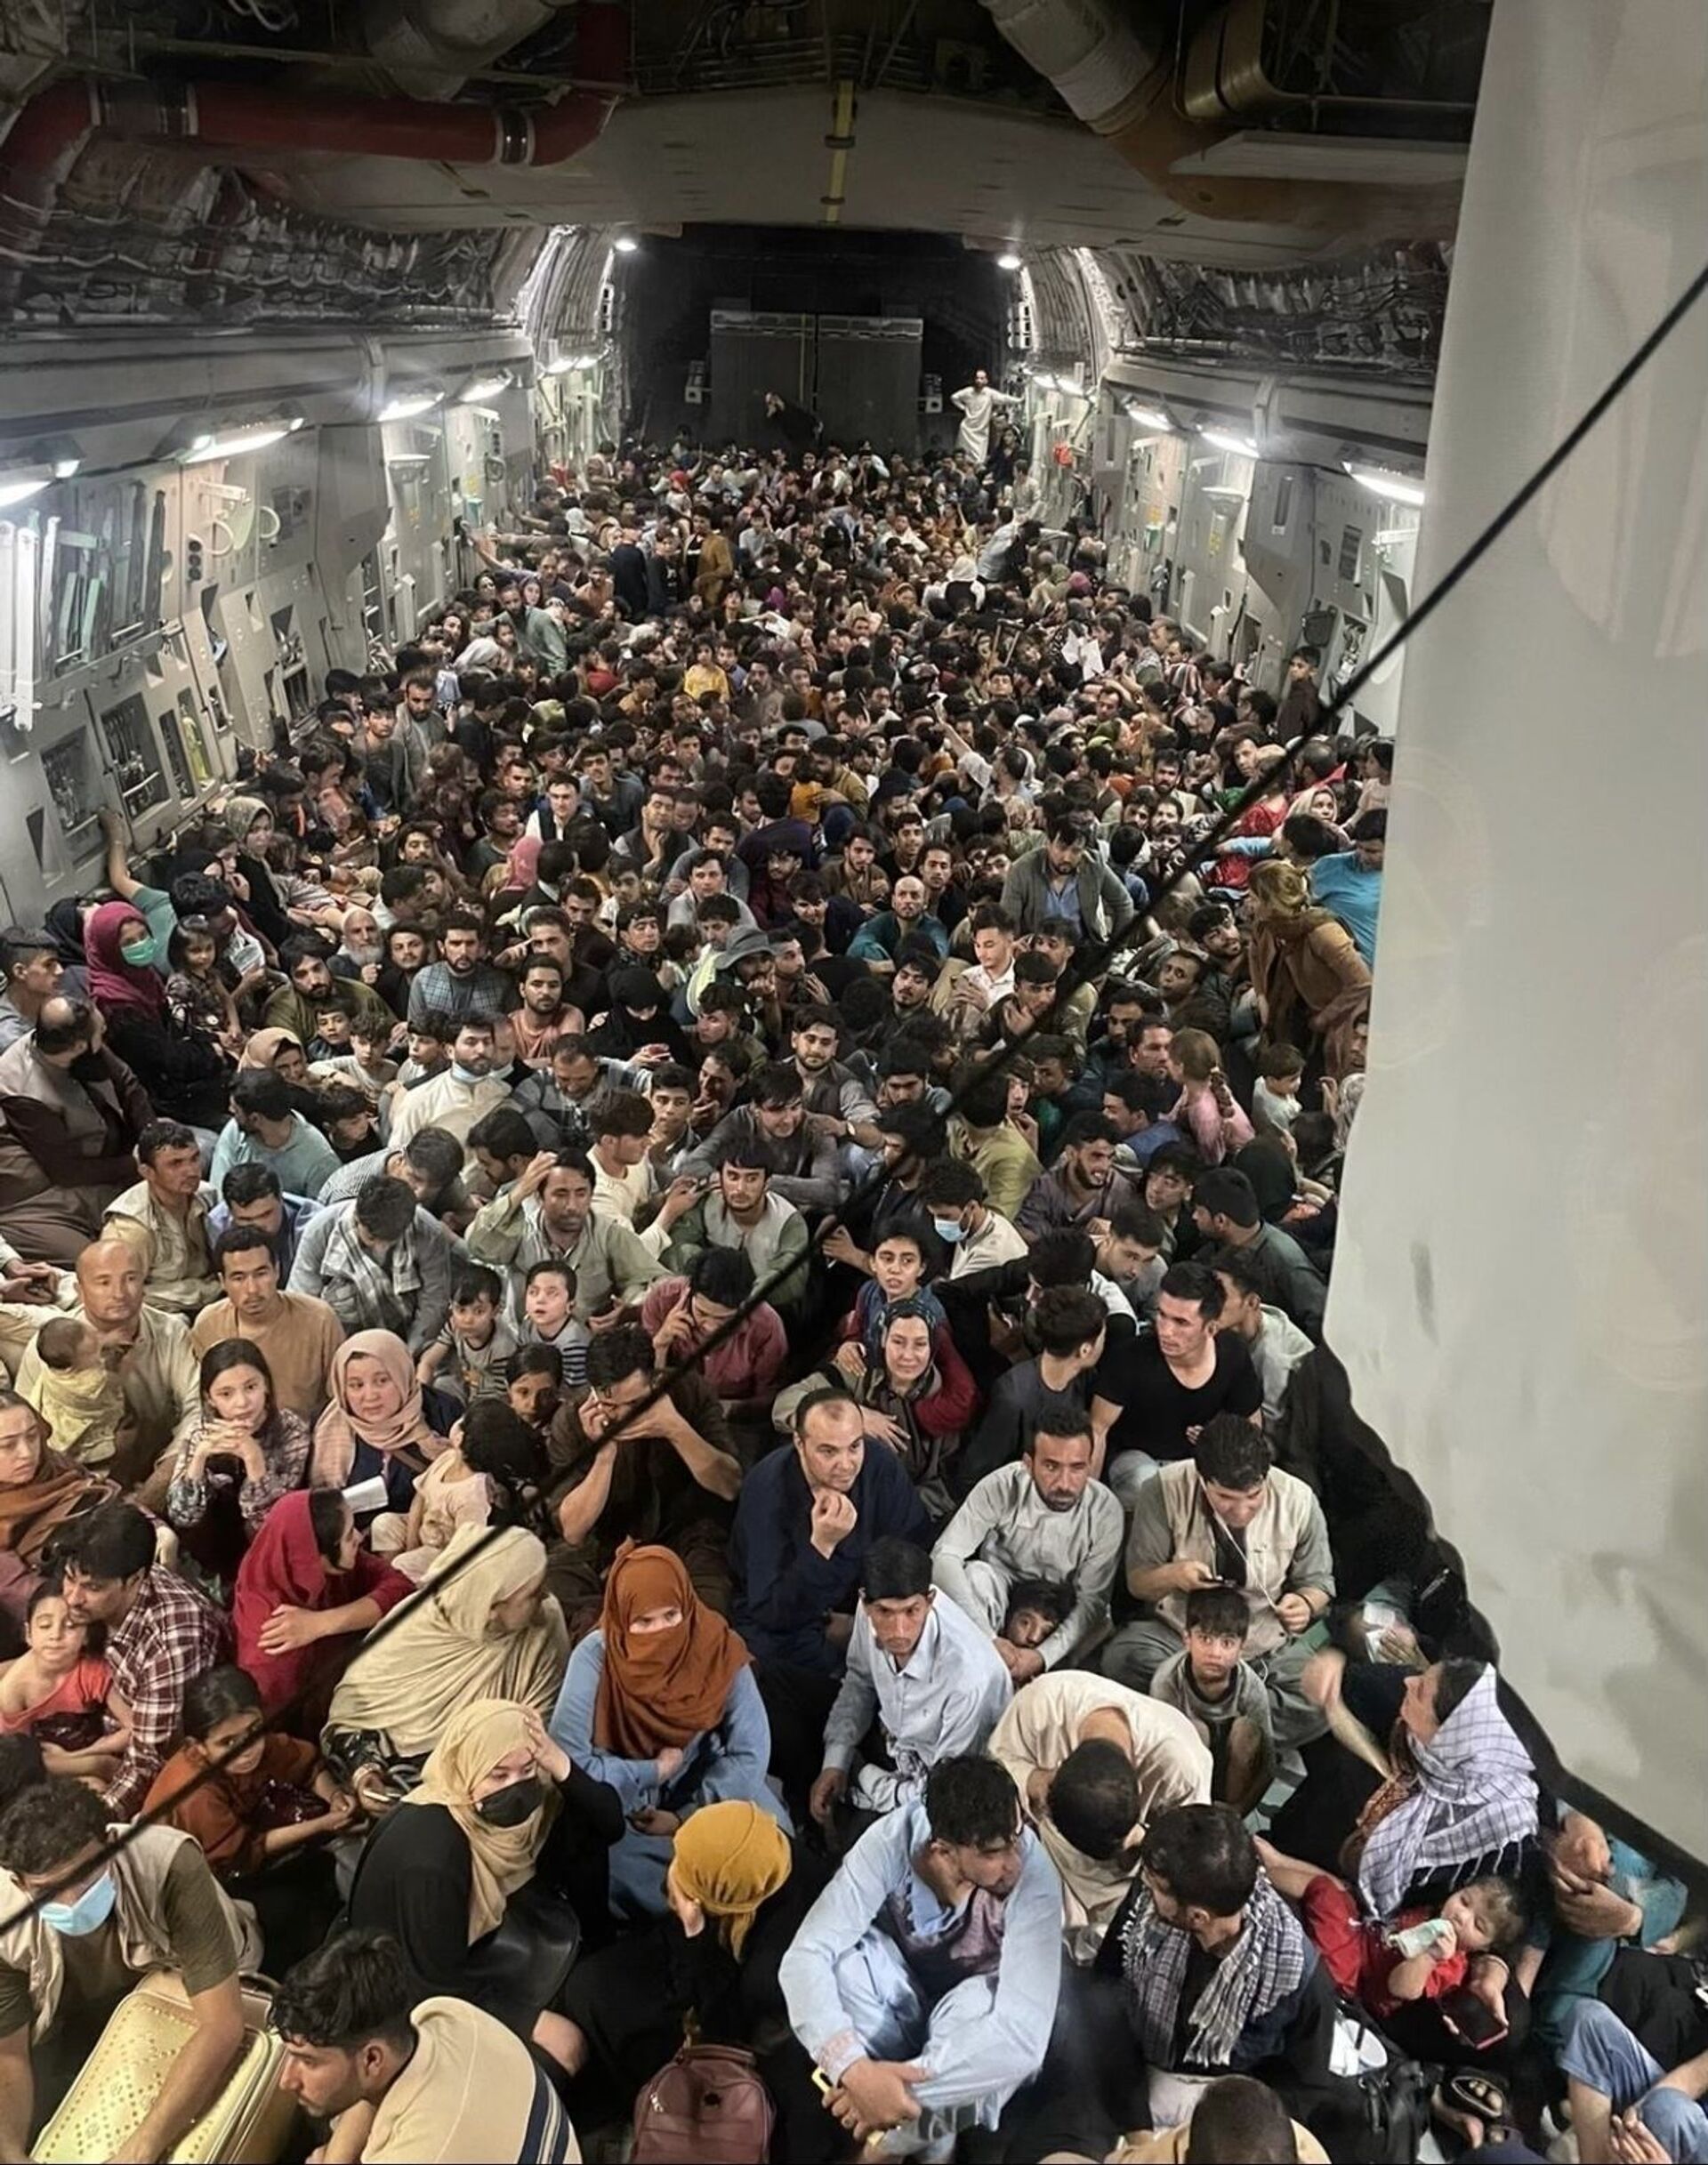 A U.S. Air Force C-17 Globemaster III safely transported approximately 640 Afghan citizens from Hamid Karzai International Airport Aug. 15, 2021. - Sputnik International, 1920, 07.09.2021